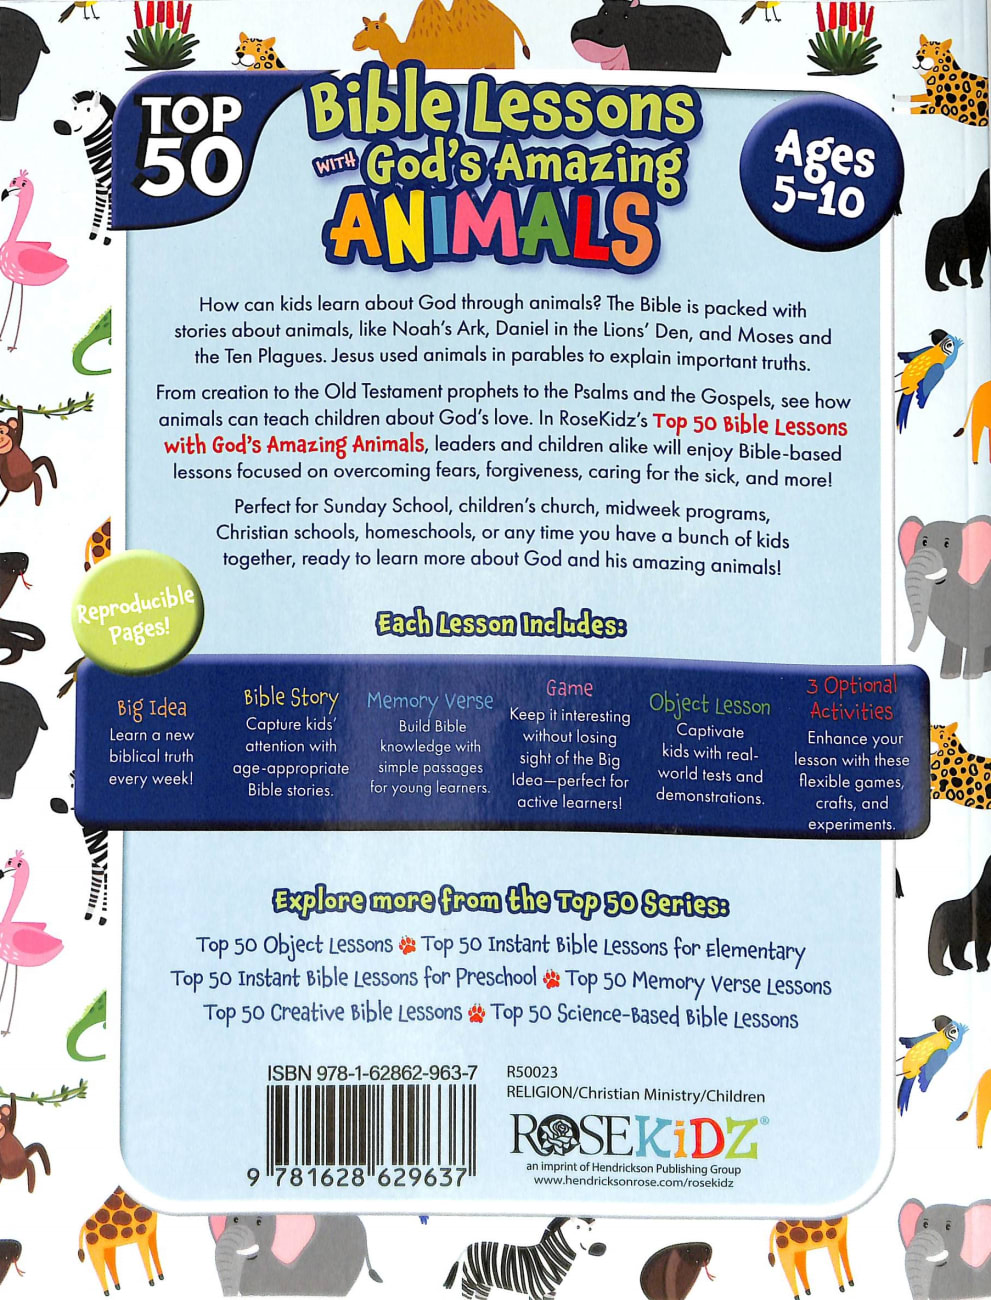 Top 50 Bible Lessons With God's Amazing Animals by Dean Anderson | Koorong